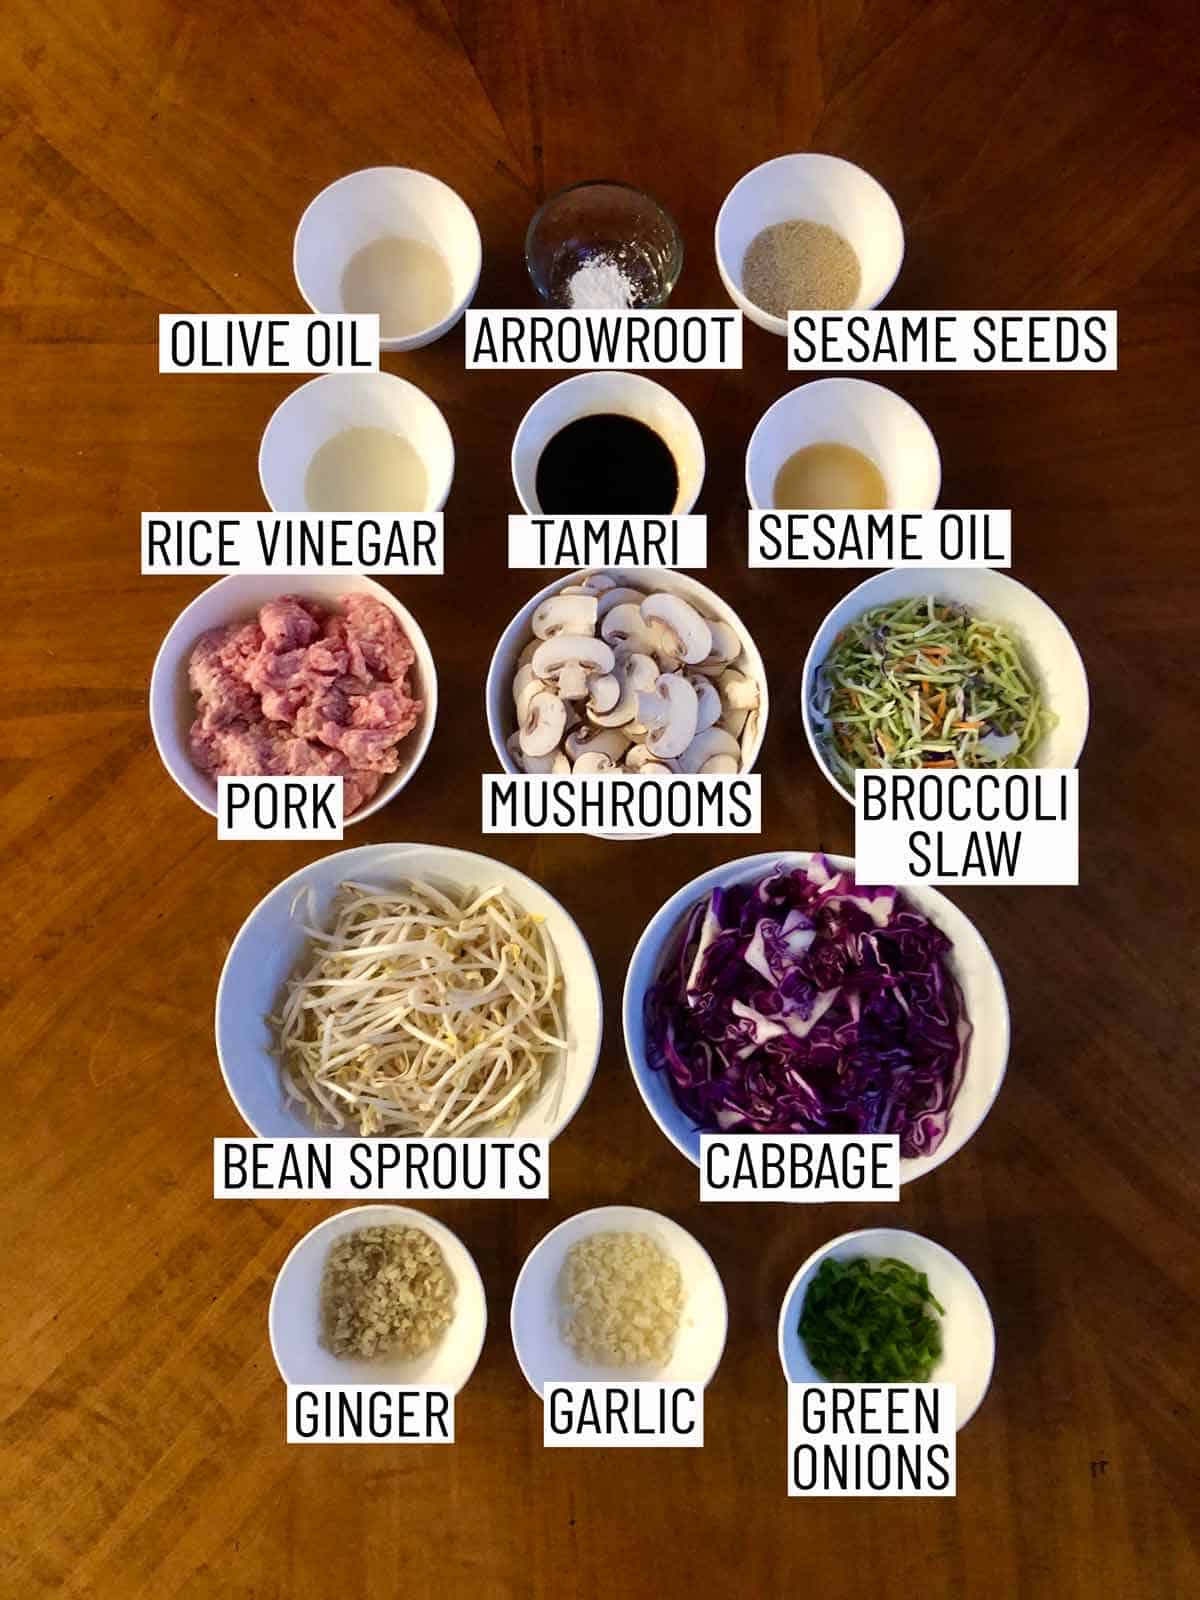 Overhead image of ingredients for egg roll in a bowl: olive oil, arrowroot, sesame seeds, rice vinegar, tamari, sesame oil, pork, mushrooms, broccoli slaw, bean sprouts, cabbage, ginger, garlic, green onions.